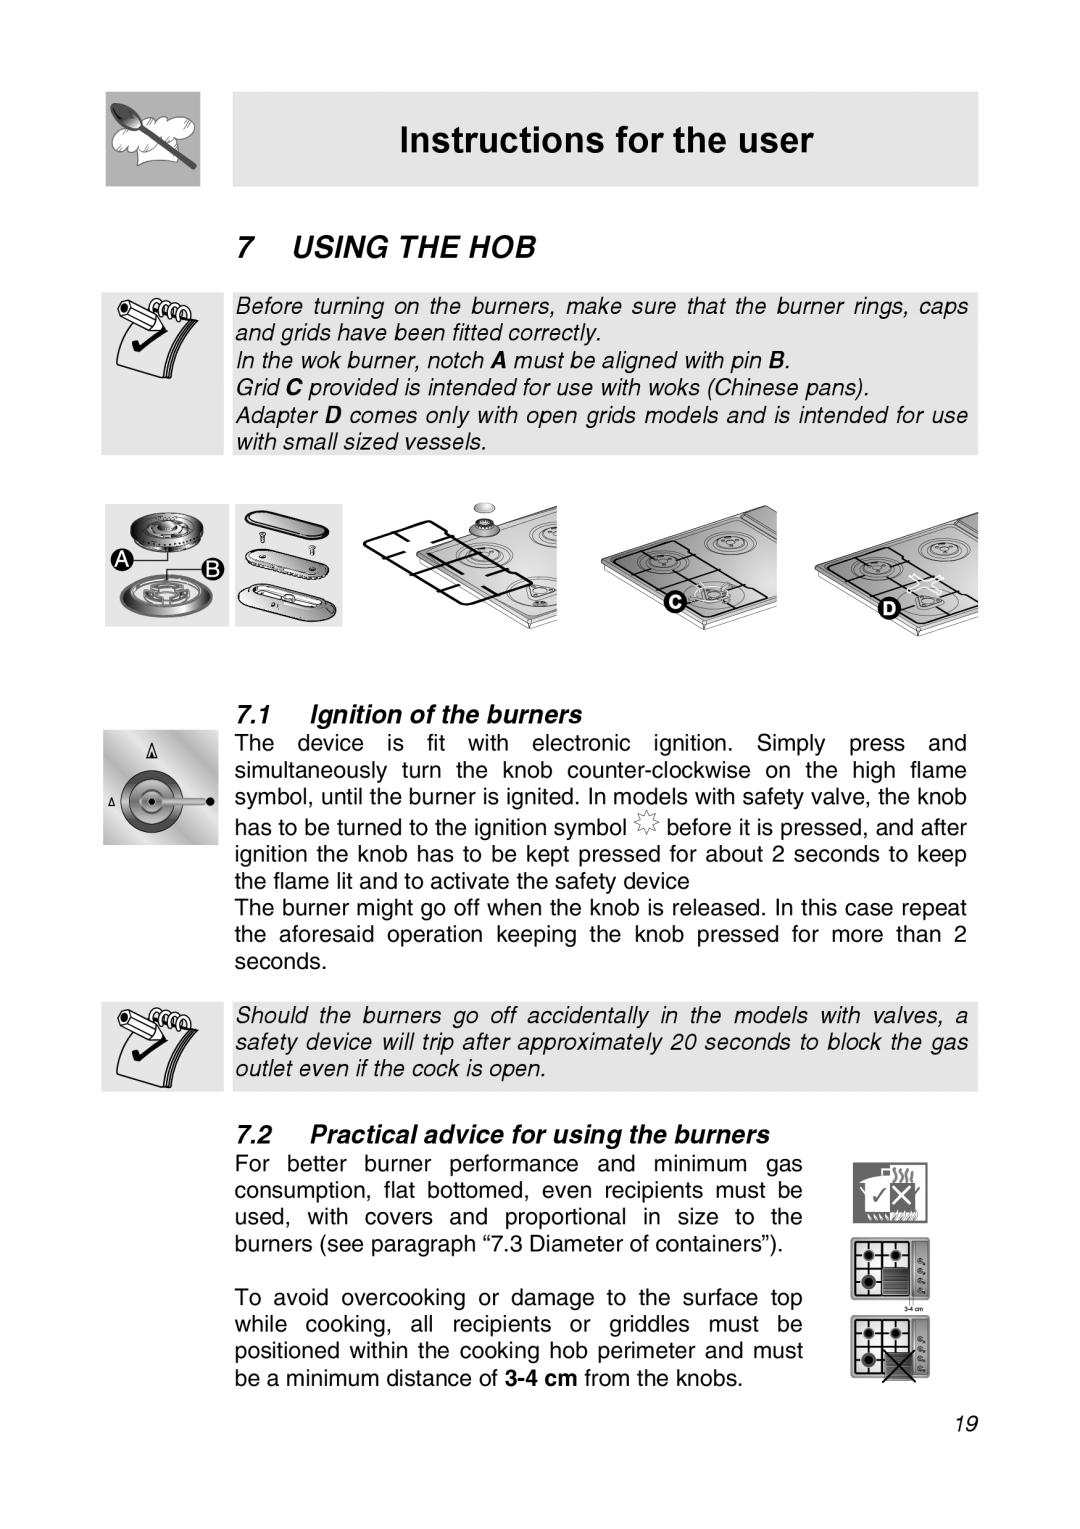 Smeg CIR34AX3 Instructions for the user, Using The Hob, Ignition of the burners, Practical advice for using the burners 